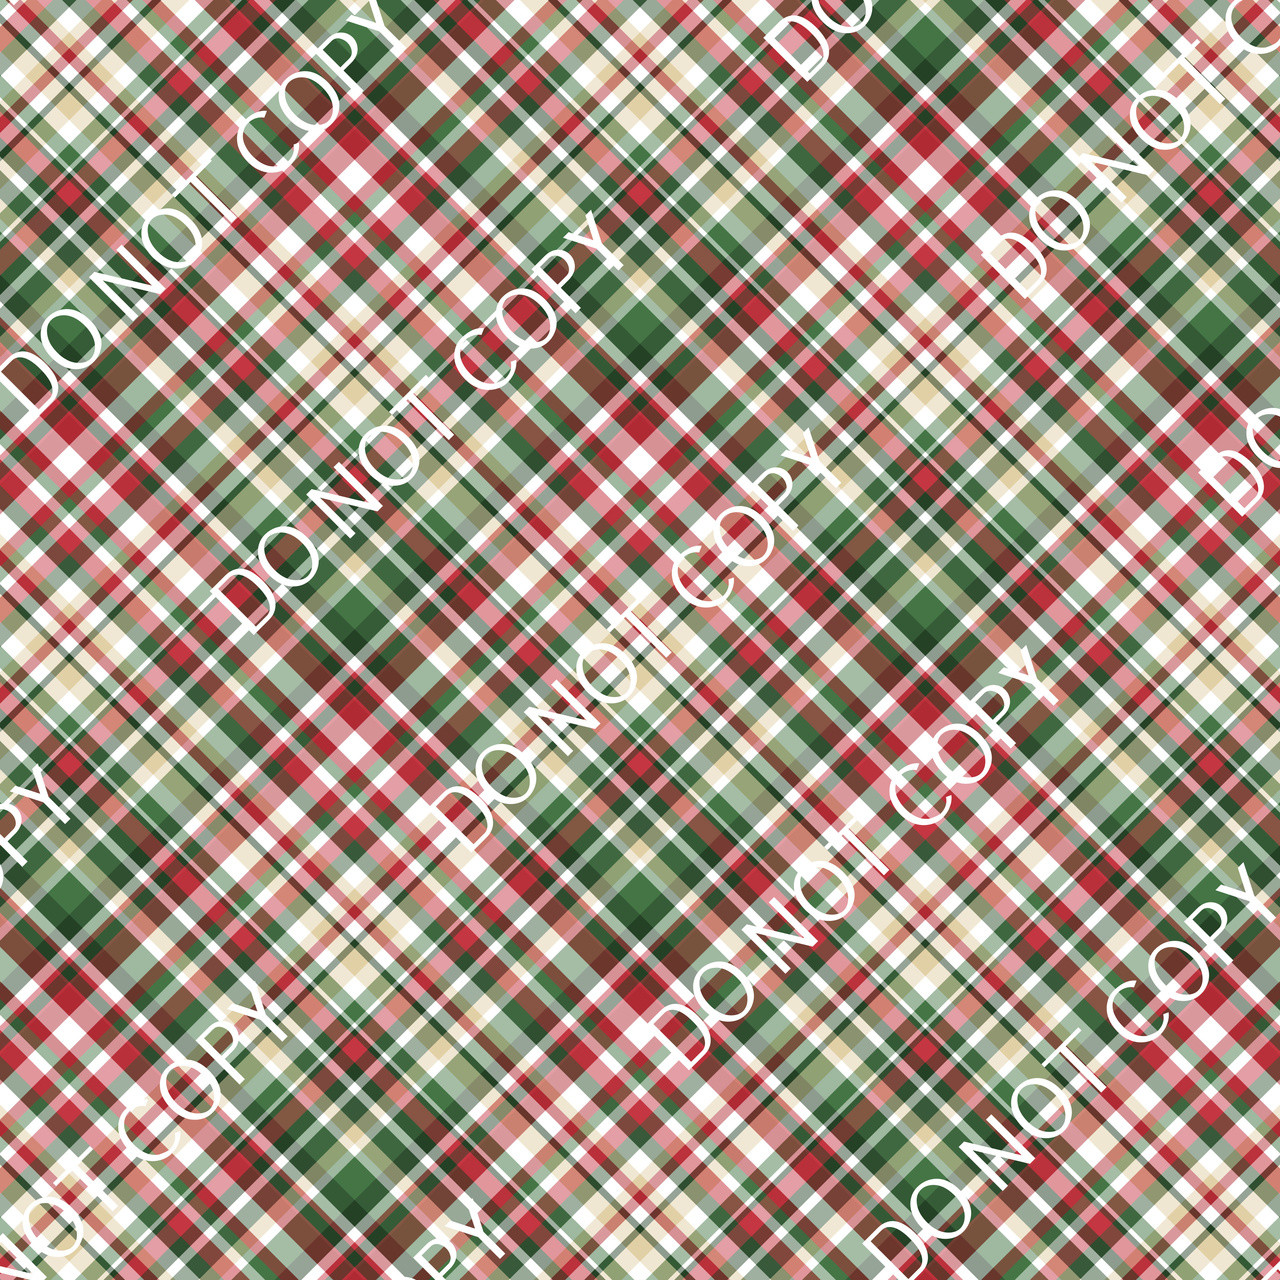 CPJDS Christmas Plaid 1